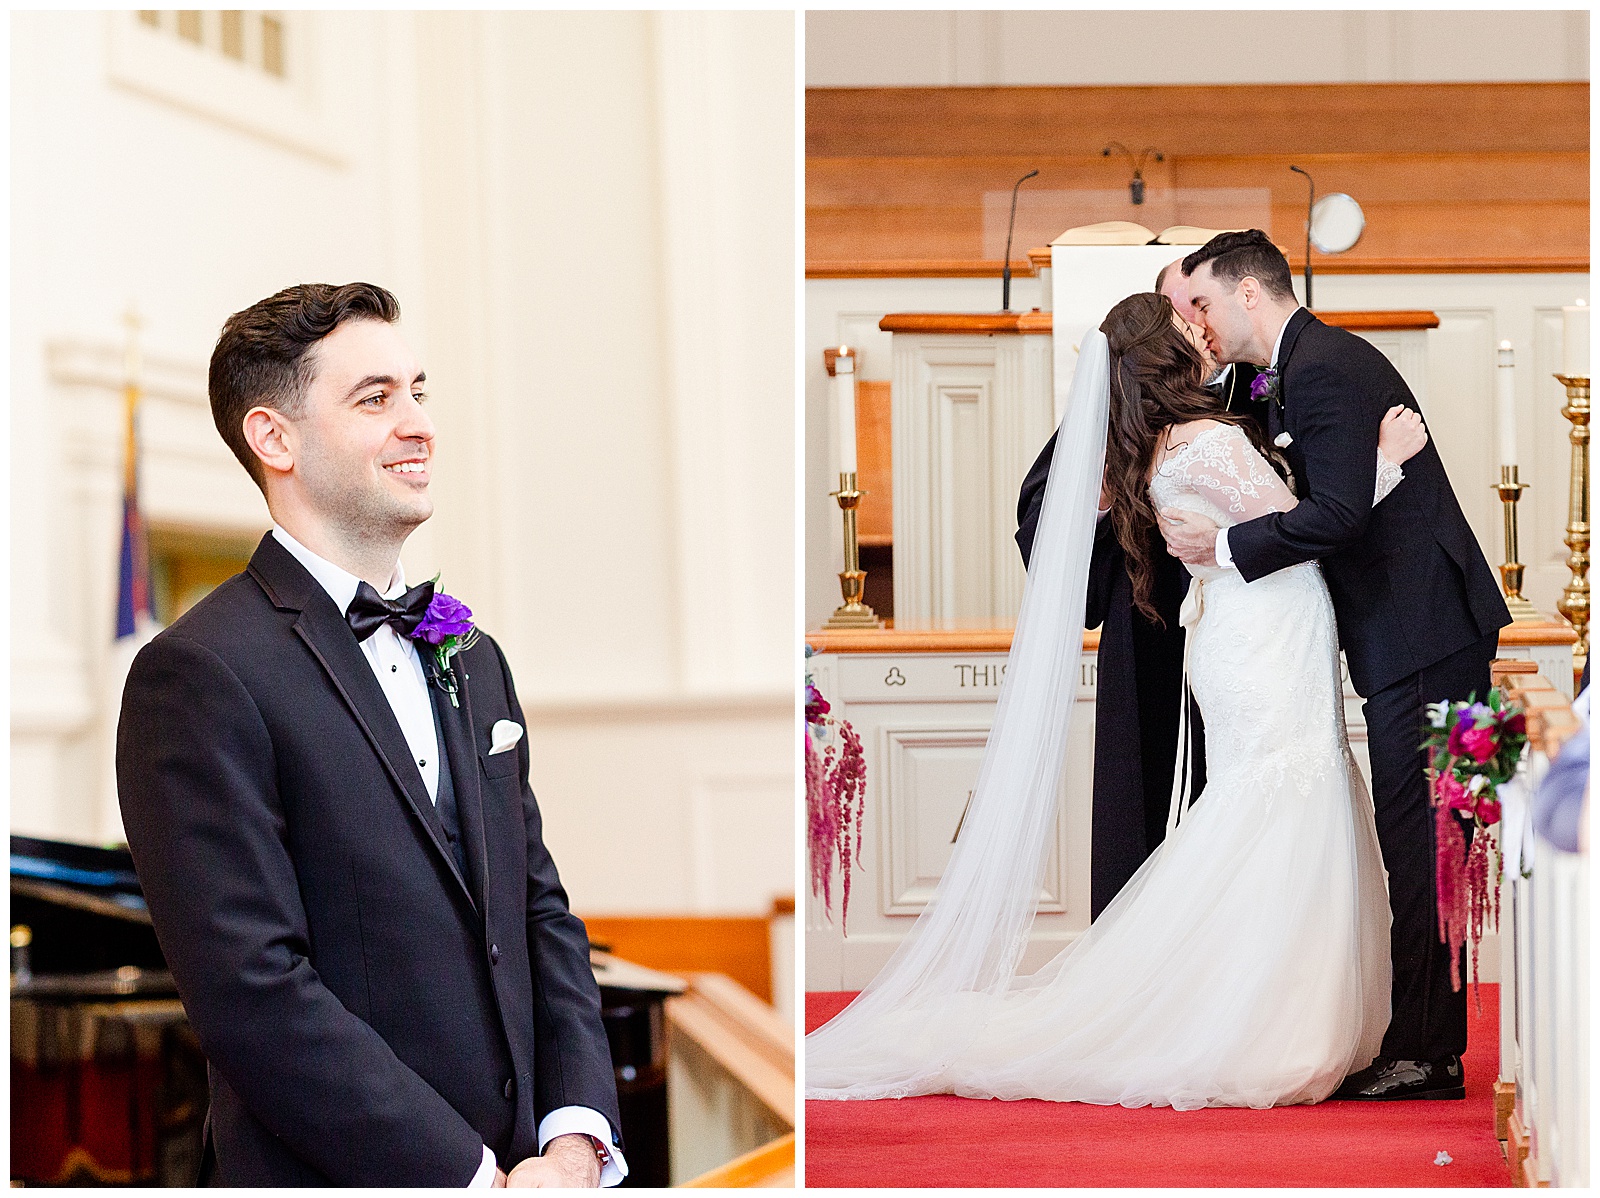 💍 smiling groom sees bride for first time first look and first kiss at wedding ceremony in indoor church 💍 Bright Colorful Summer City Wedding in Charlotte, NC with Taryn and Ryan | Kevyn Dixon Photography